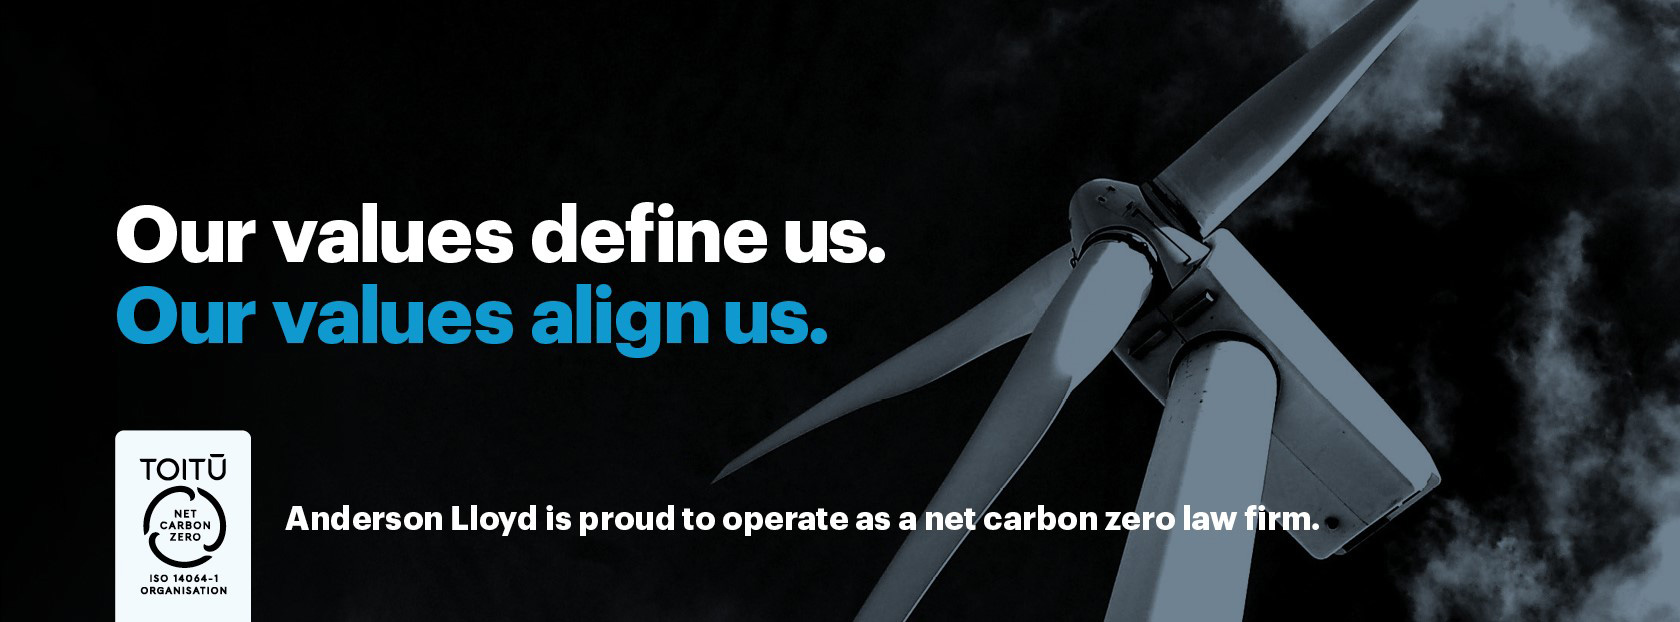 Anderson Lloyd is proud to operate as a net carbon zero law firm